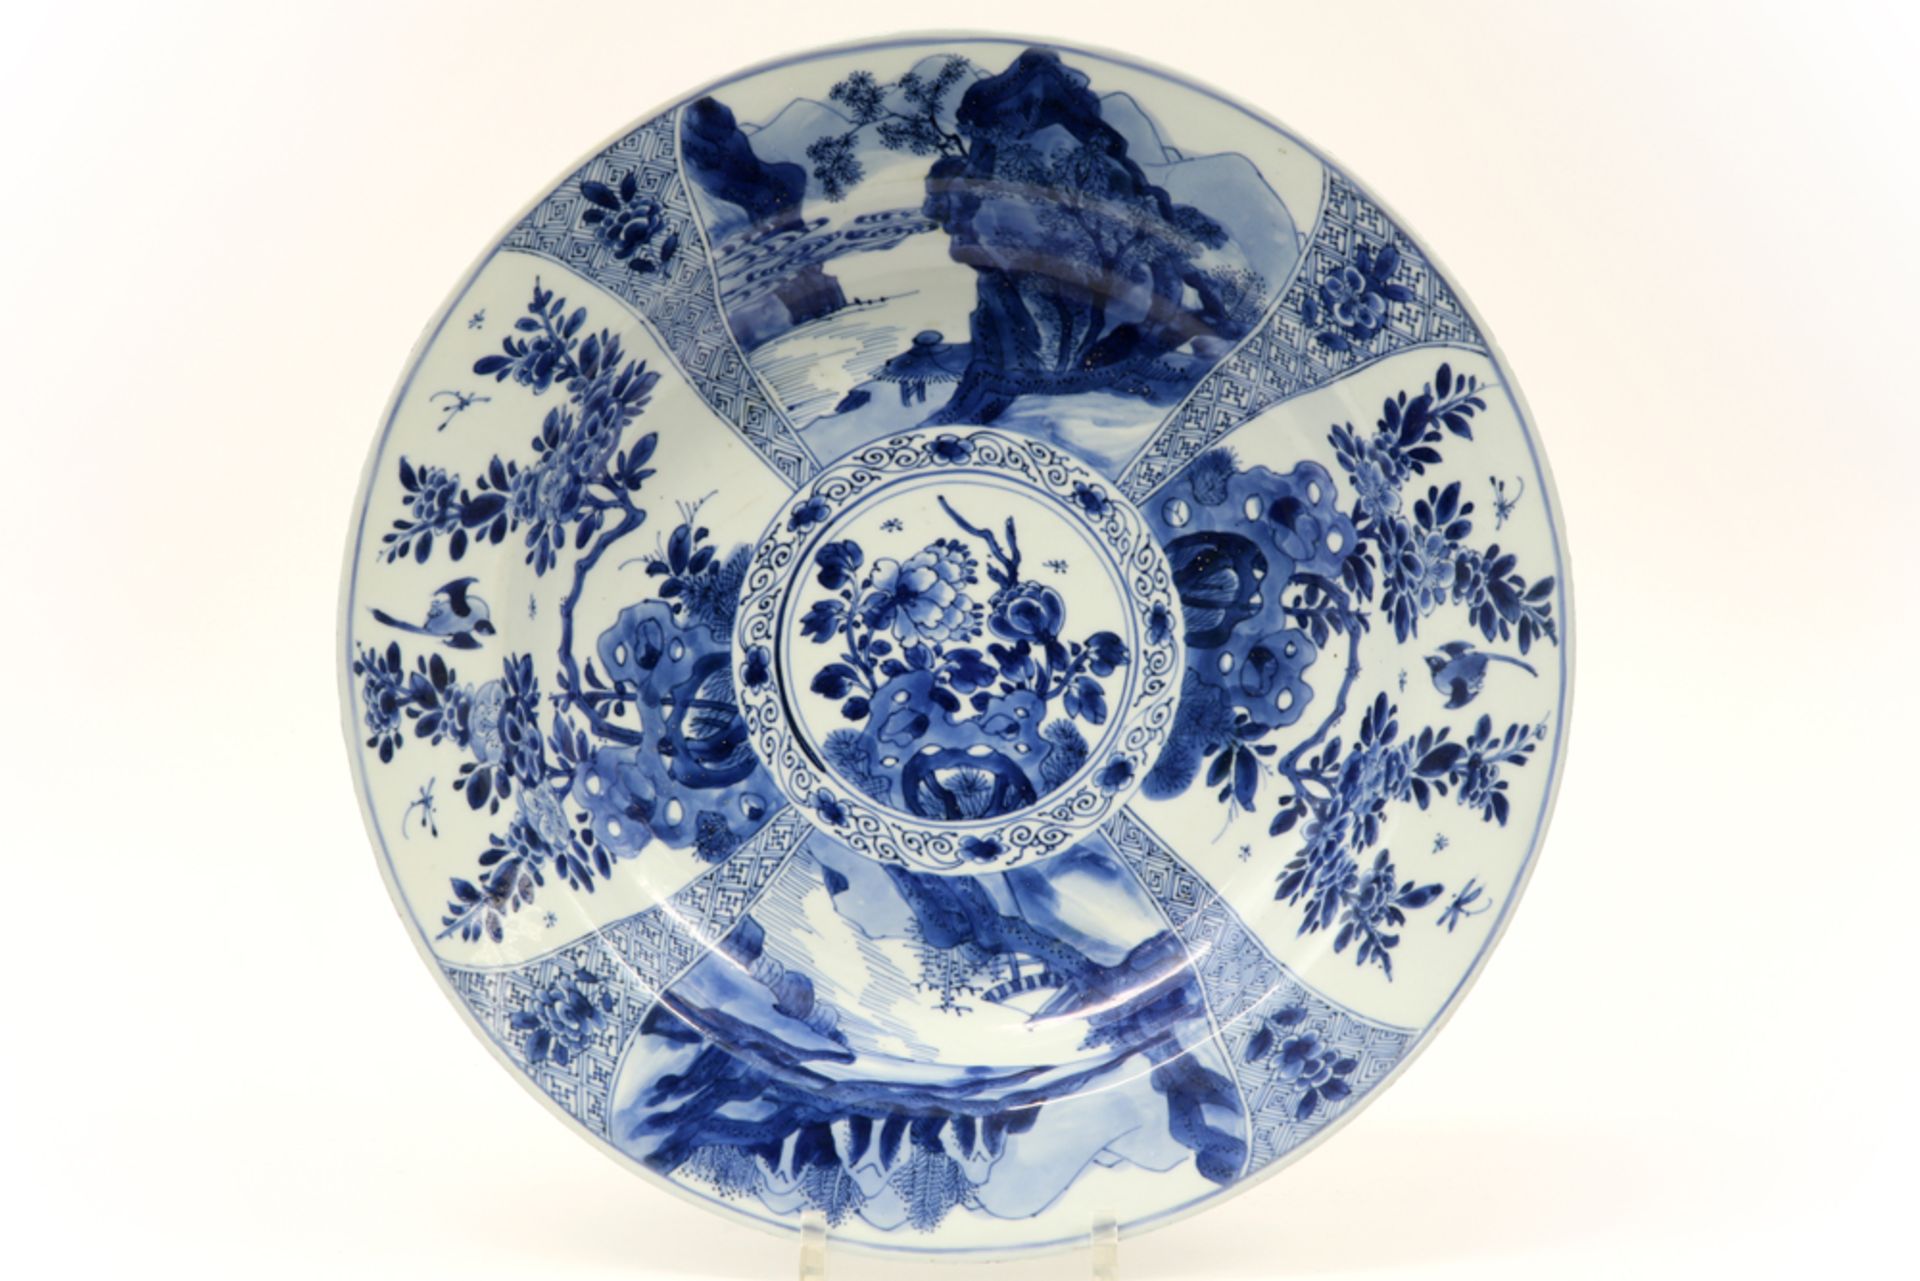 large 17th/18th Cent. Chinese Kang Hsi period dish in marked porcelain with blue-white floral and